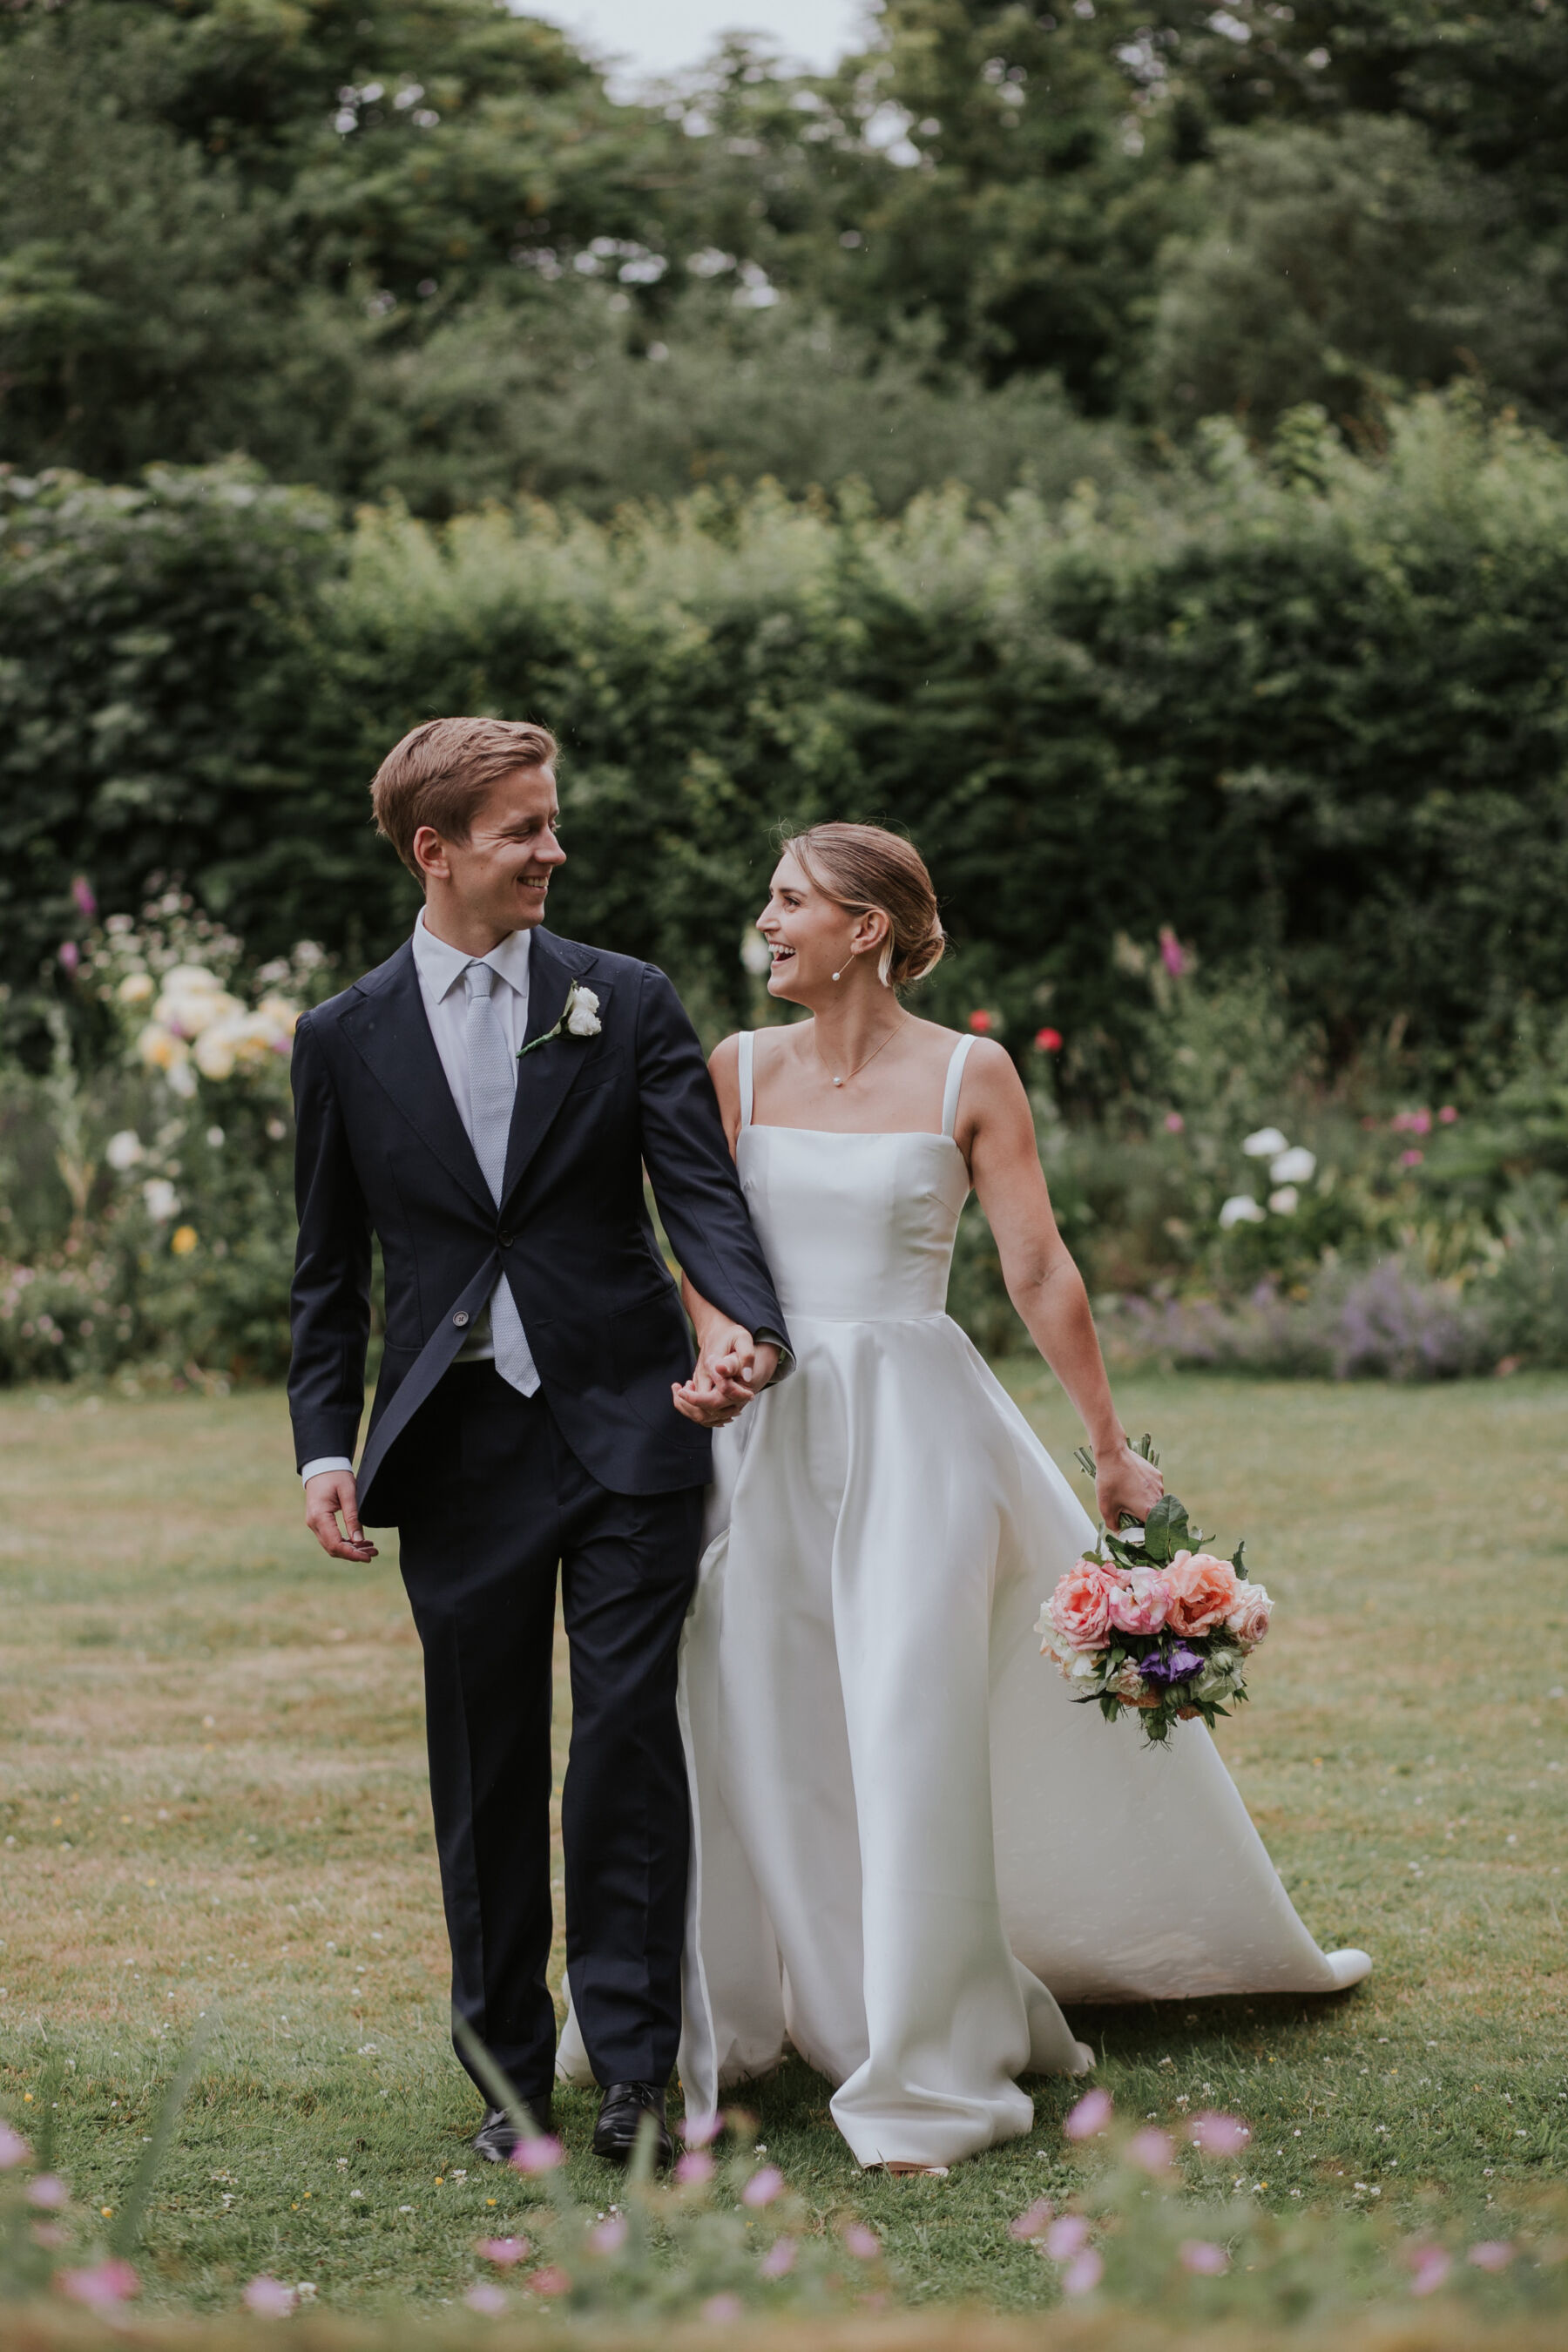 Groom in navy blue suit from Suit Supply holding hands with bride in a square neck Khya wedding dress as they walk through an English country garden.